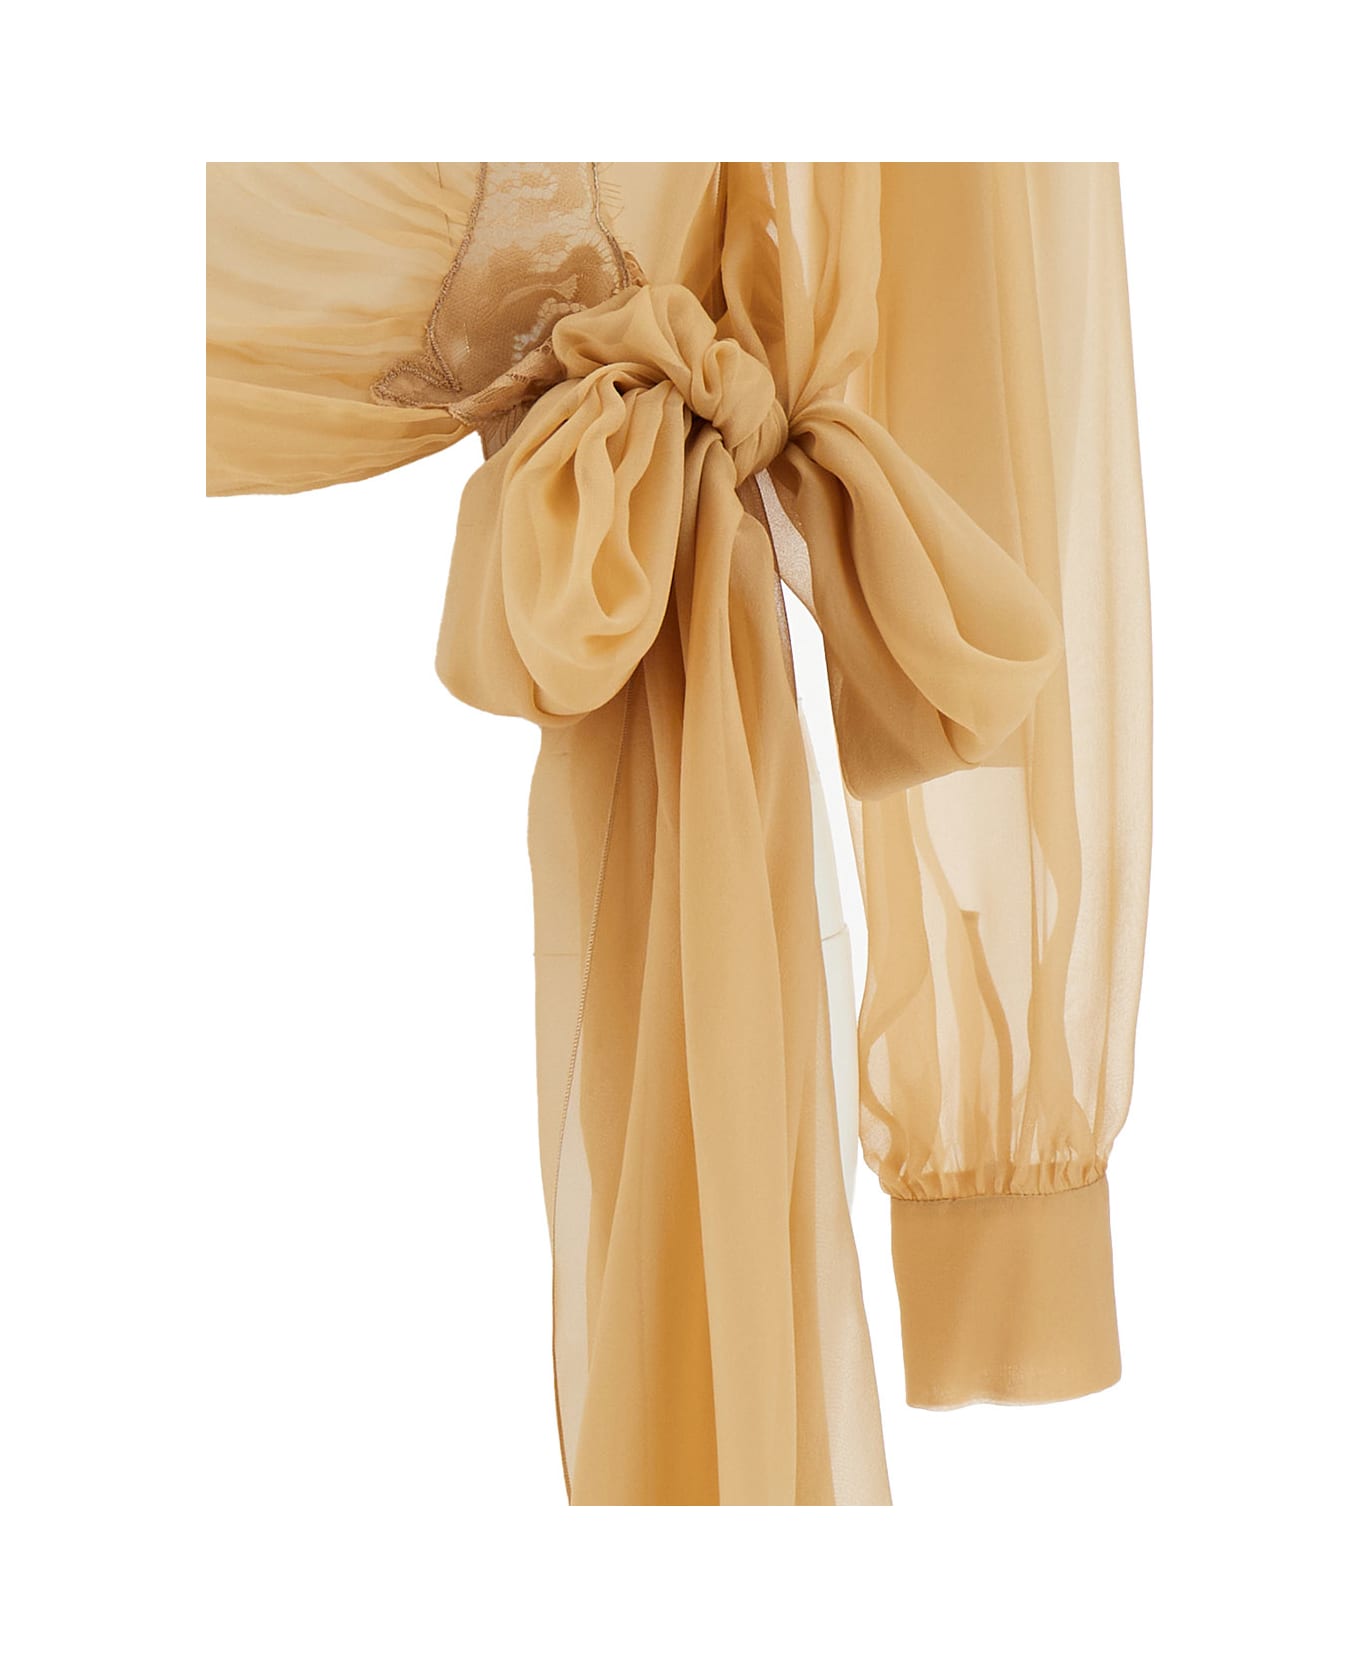 Alberta Ferretti Beige Long Sleeve Blouse With Lace Insert And Bow In Silk Woman - Beige シャツ